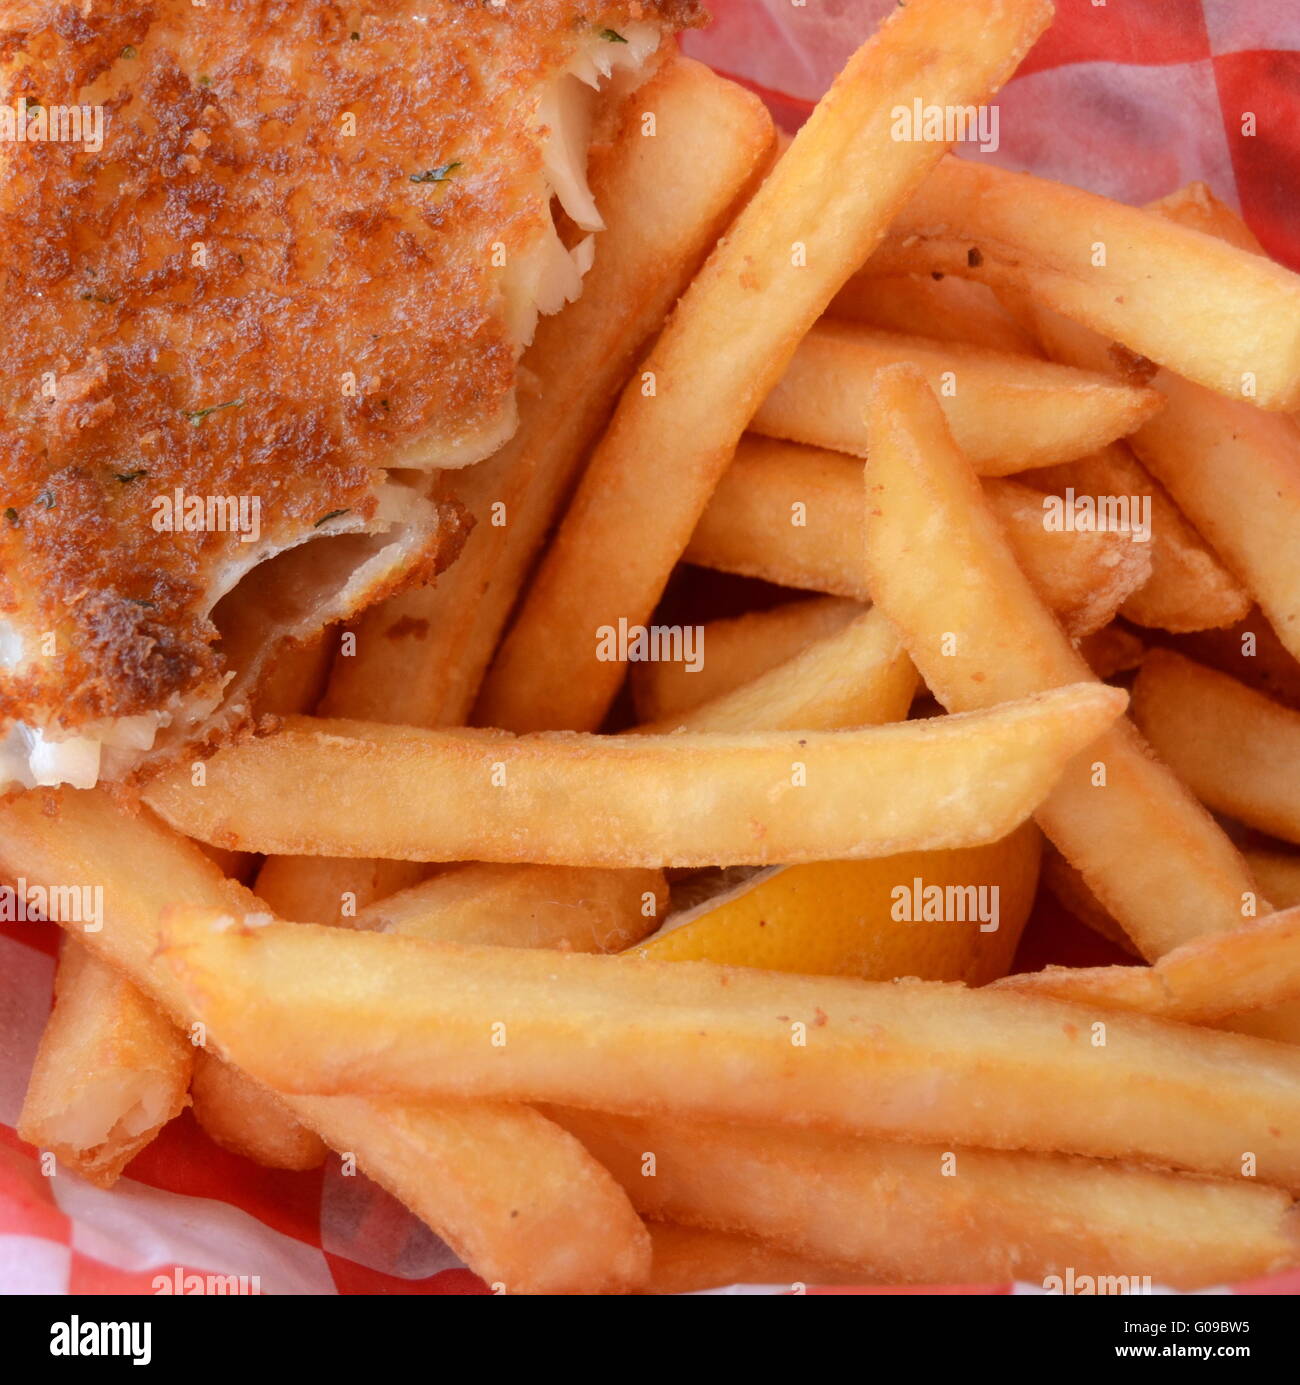 Food Image Of Takeaway Fish And Chips In Paper Stock Photo